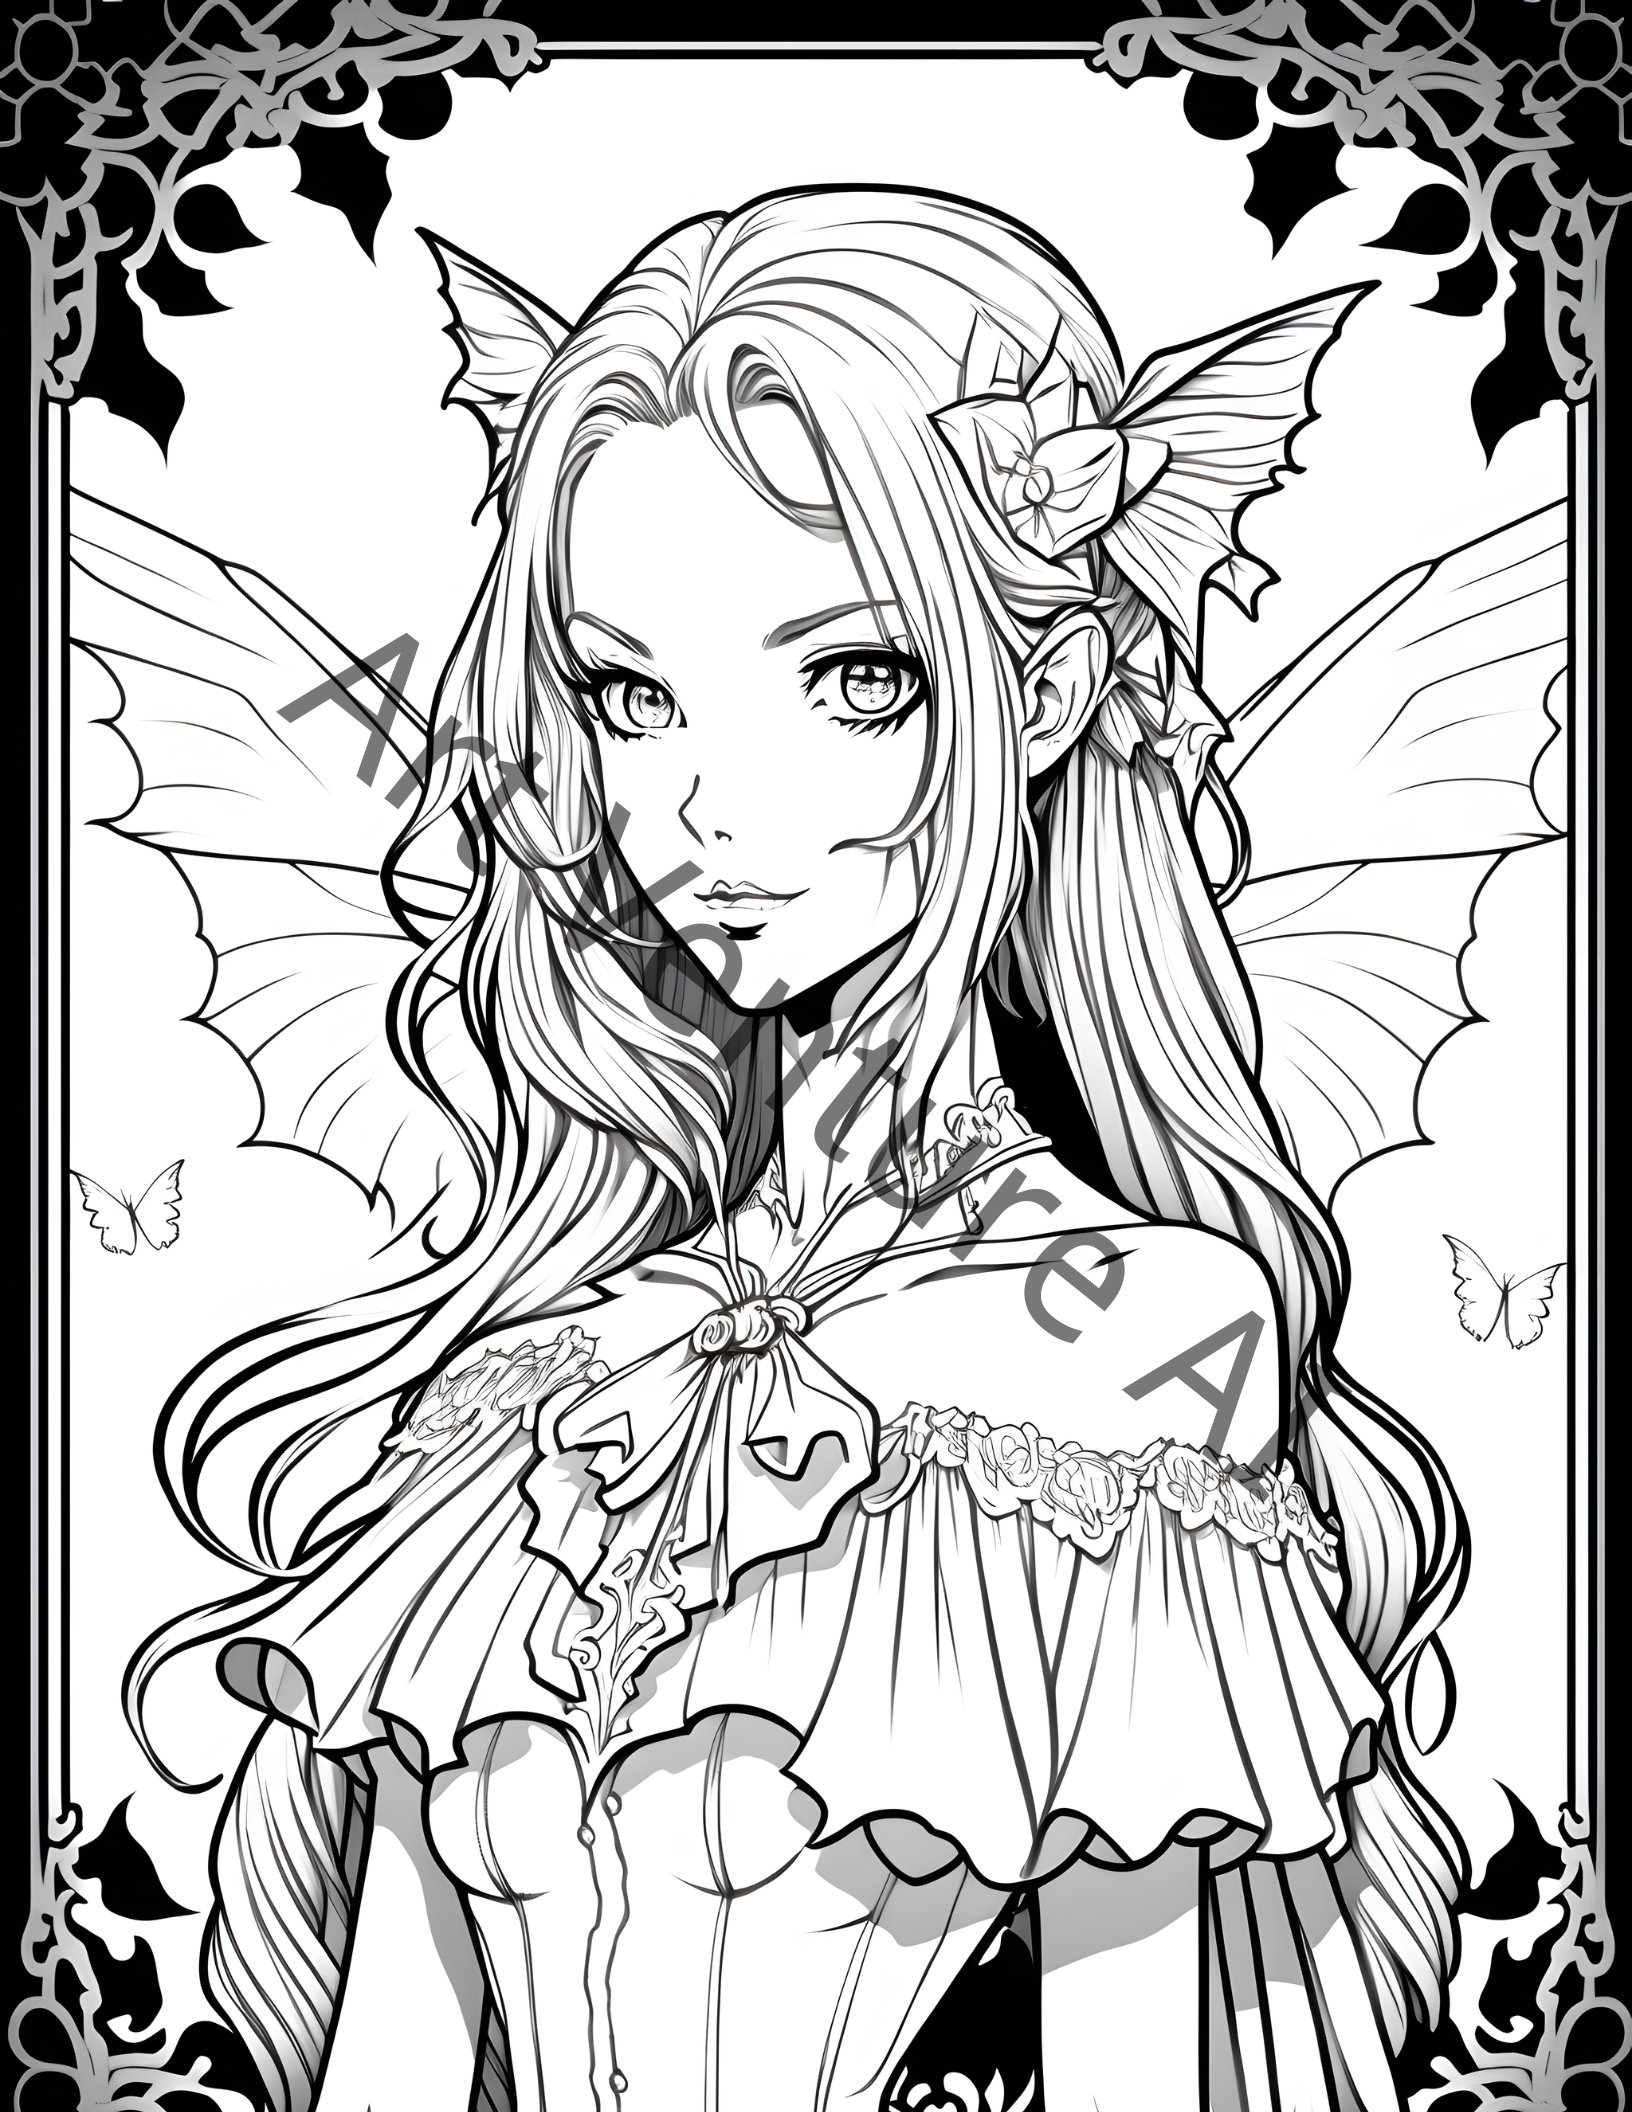 30 Gothic Girls Set 2 Coloring Pages Bright, Medium and Dark Versions  Printable Adult Coloring Pages Download Grayscale Illustration 